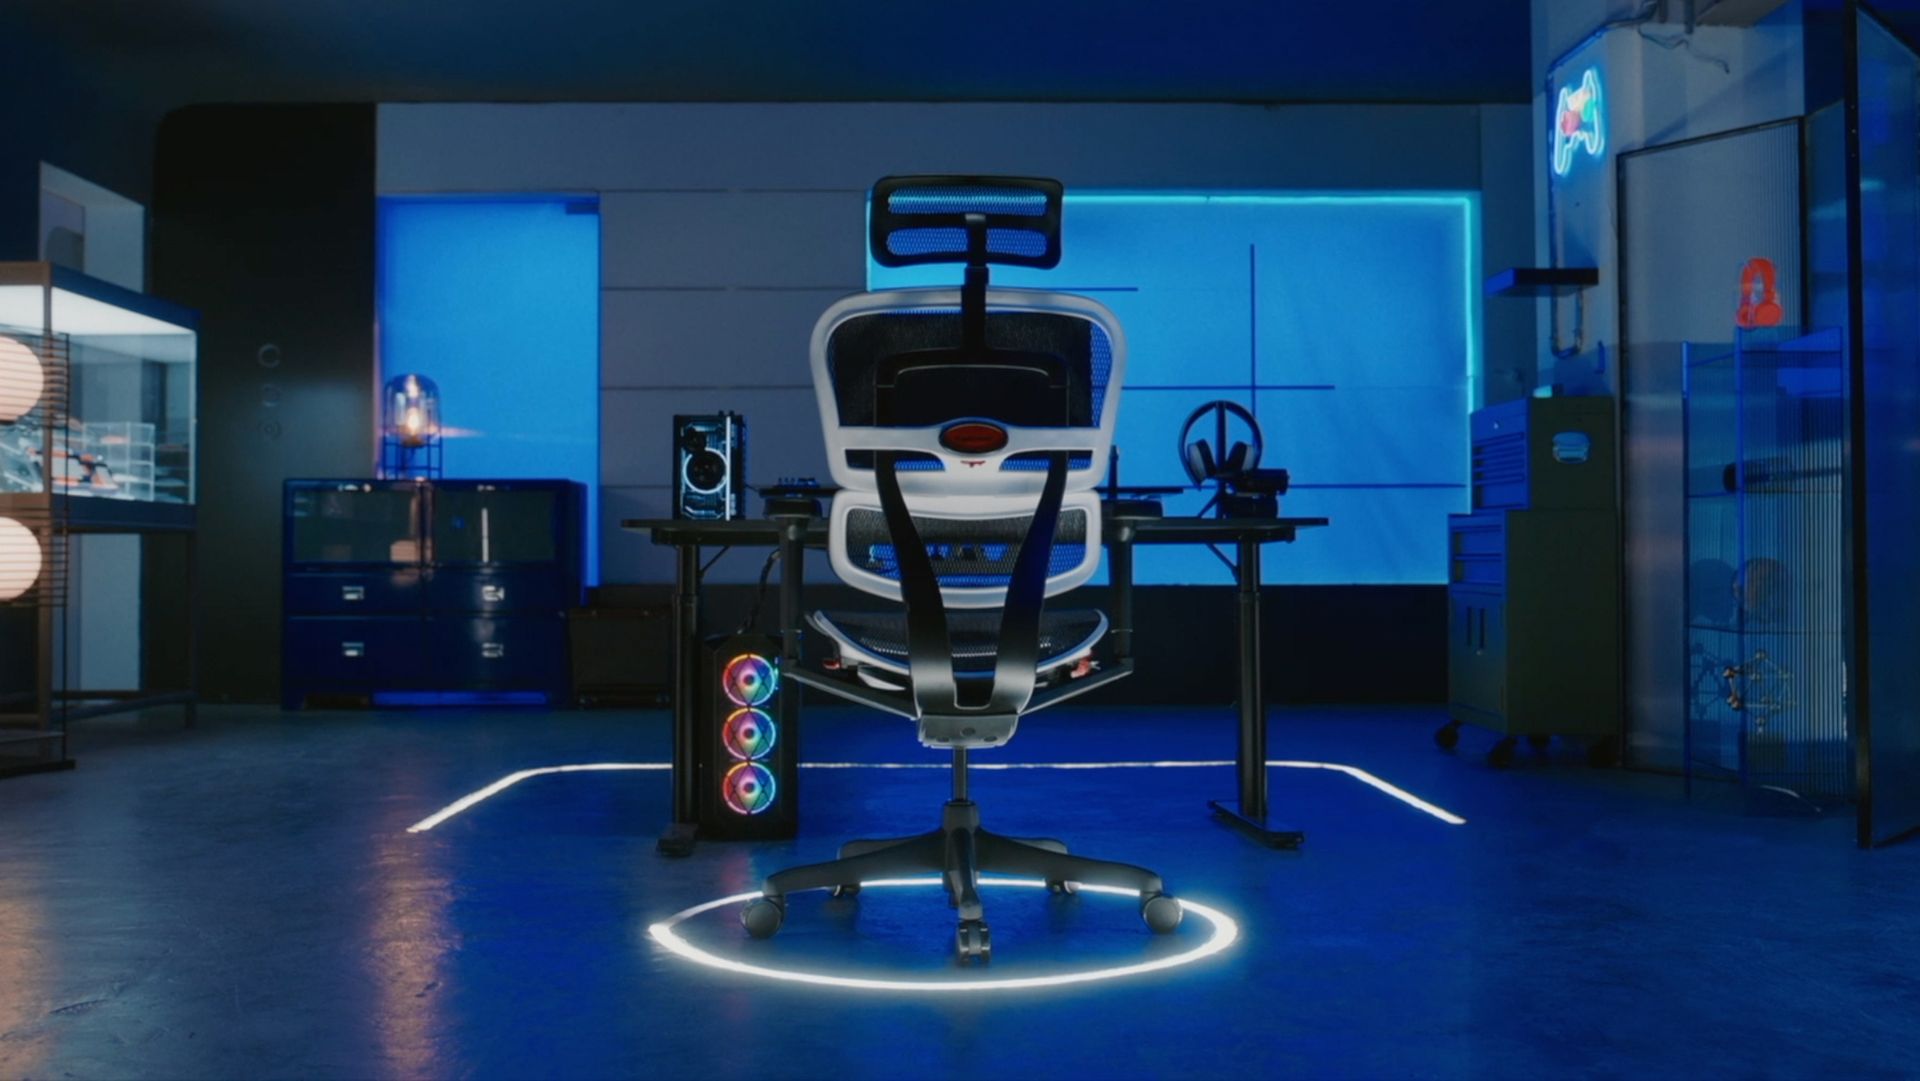 White Ergohuman Ultra gaming chair in the middle of a dark room with blue LED lighting. The chair is situated at a black desk. In the background of the room are cabinets and drawers, and two large transclucent windows with blue lights. 